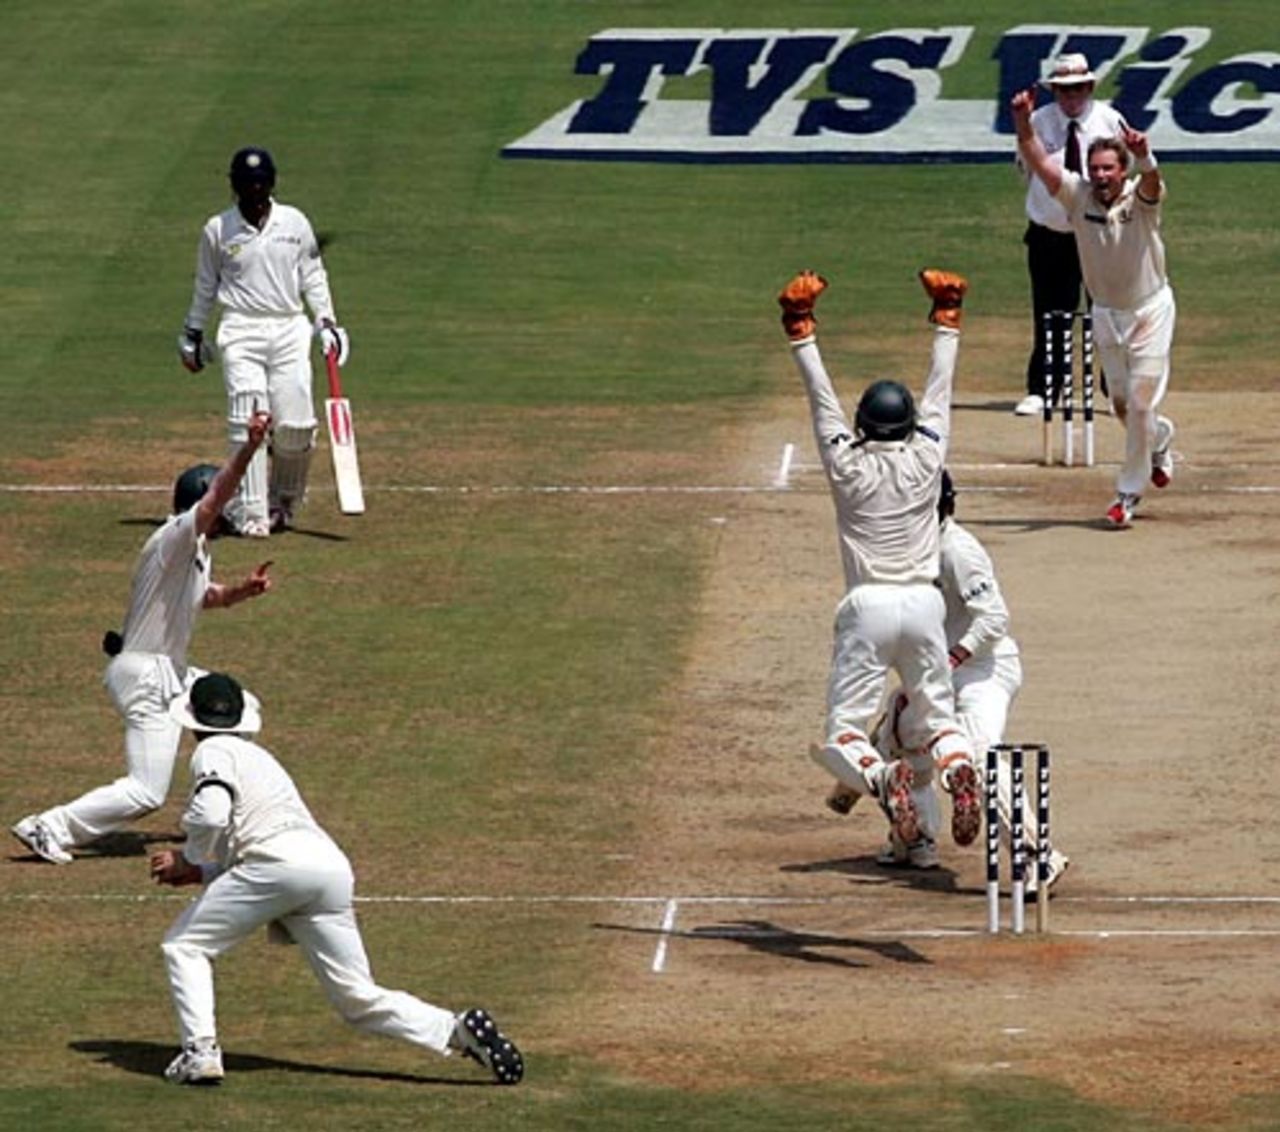 Shane Warne celebrates dismissing Irfan Pathan to become the leading Test wicket-taker of all time, India v Australia, 2nd Test, Chennai, October 15, 2004